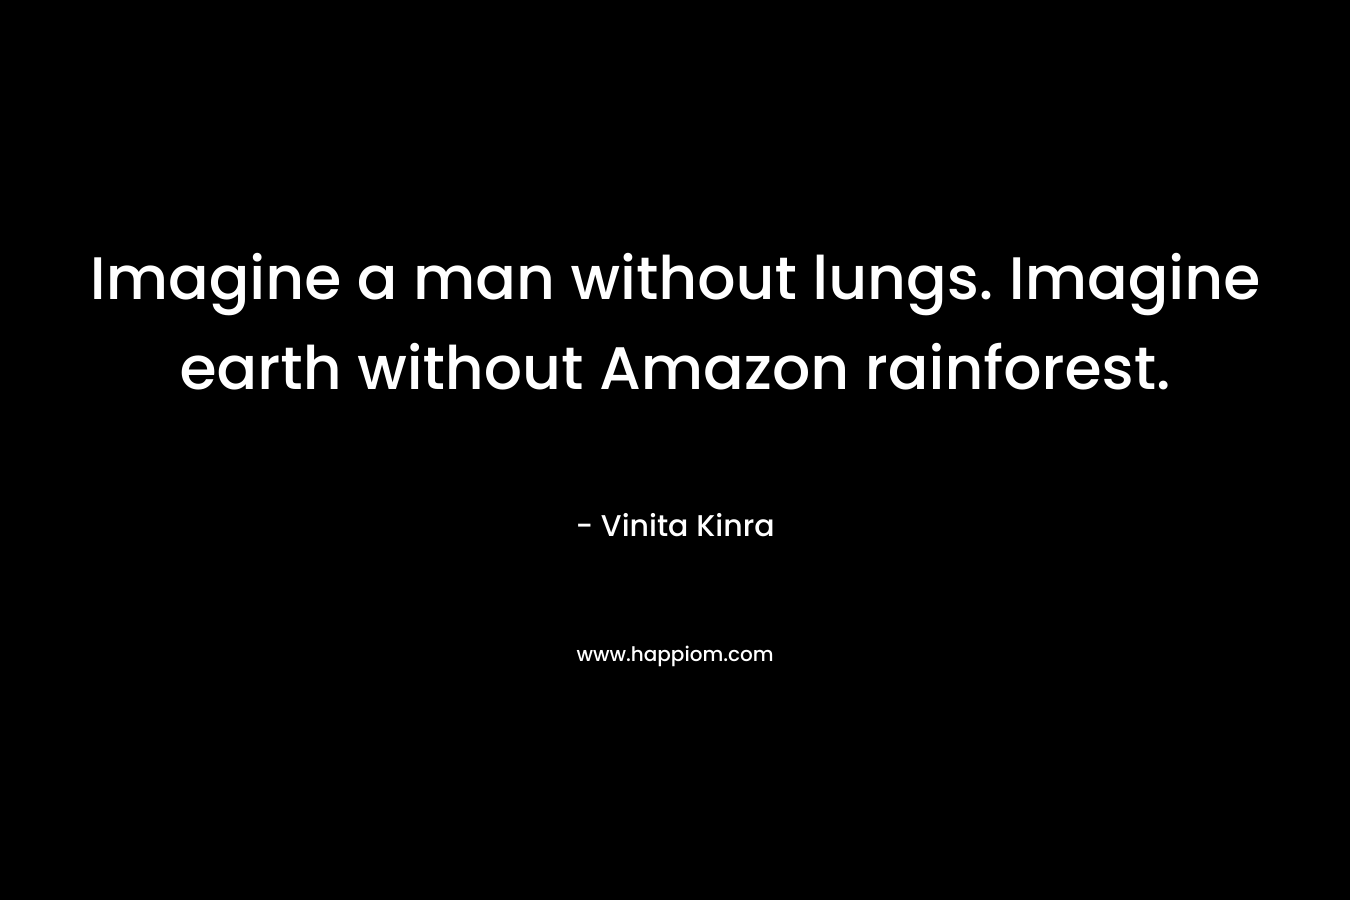 Imagine a man without lungs. Imagine earth without Amazon rainforest.